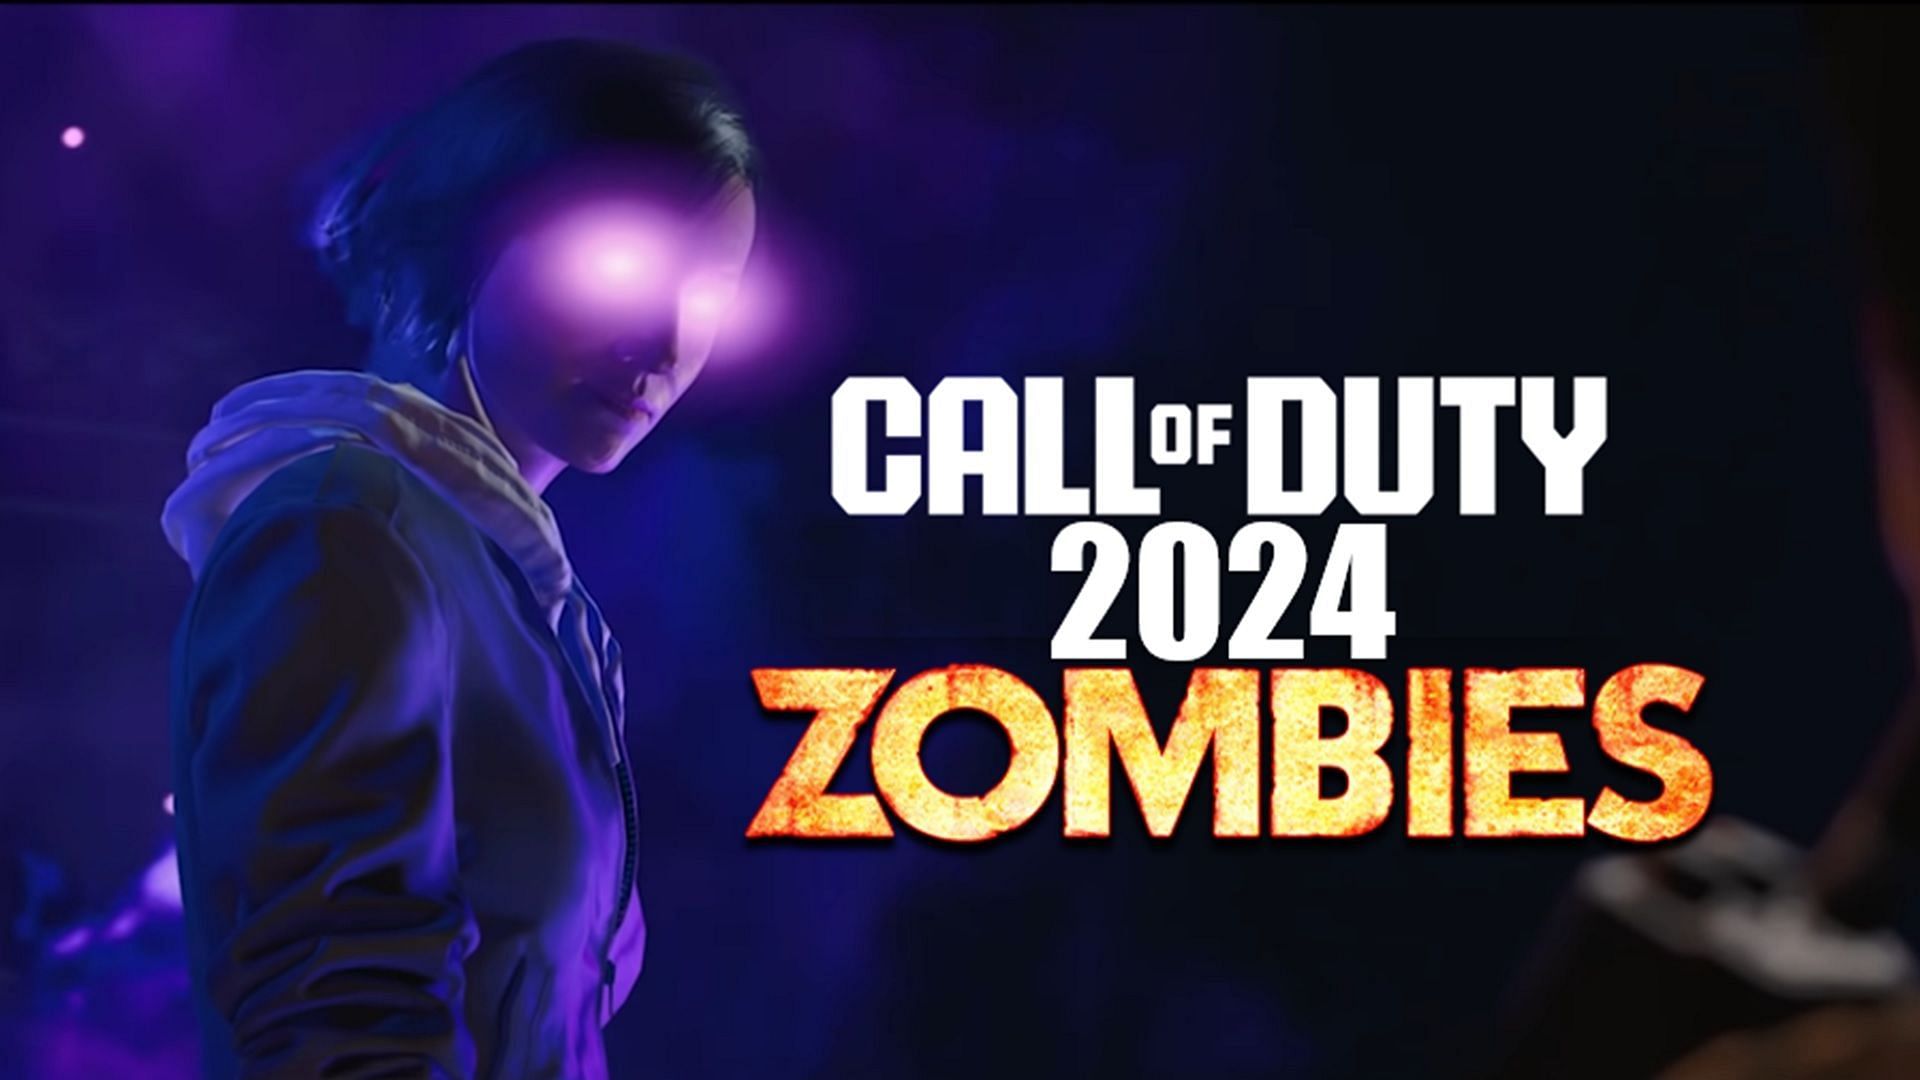 A rumored map for CoD 2024 Black Ops 5 zombies has been reportedly teased in MW3 Zombies